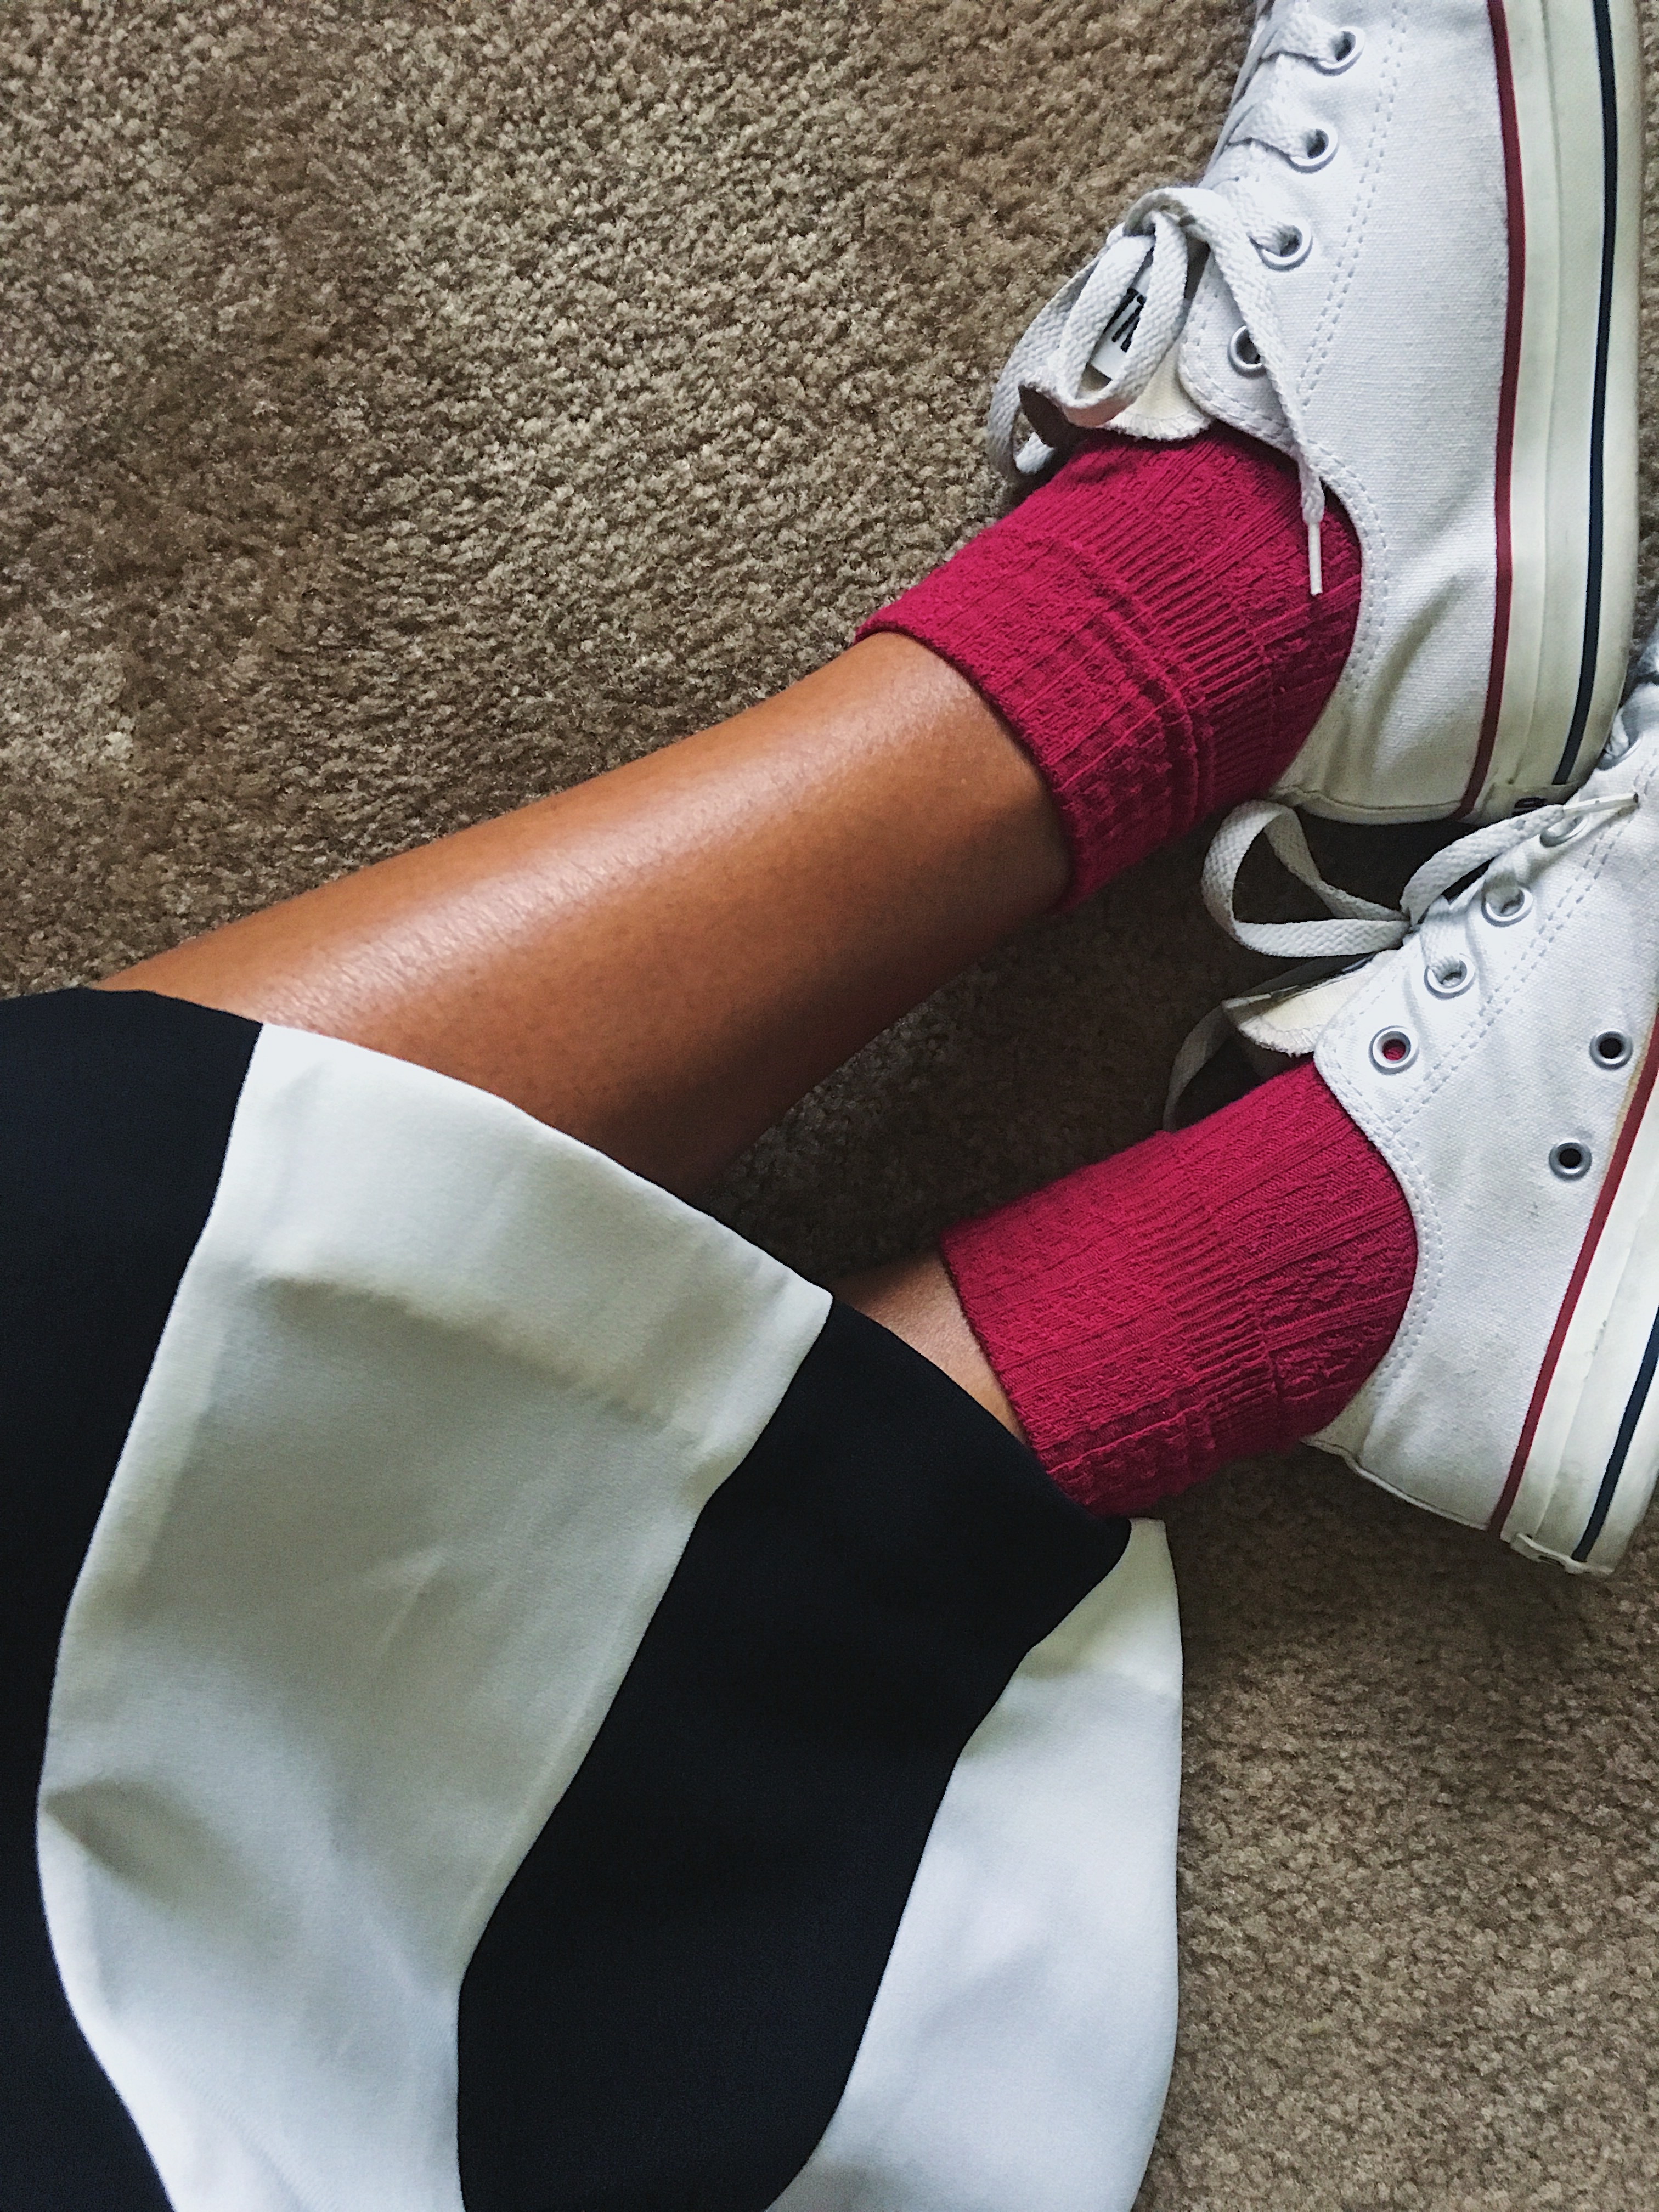 fit femme-sneakers with dresses-converse-pink socks